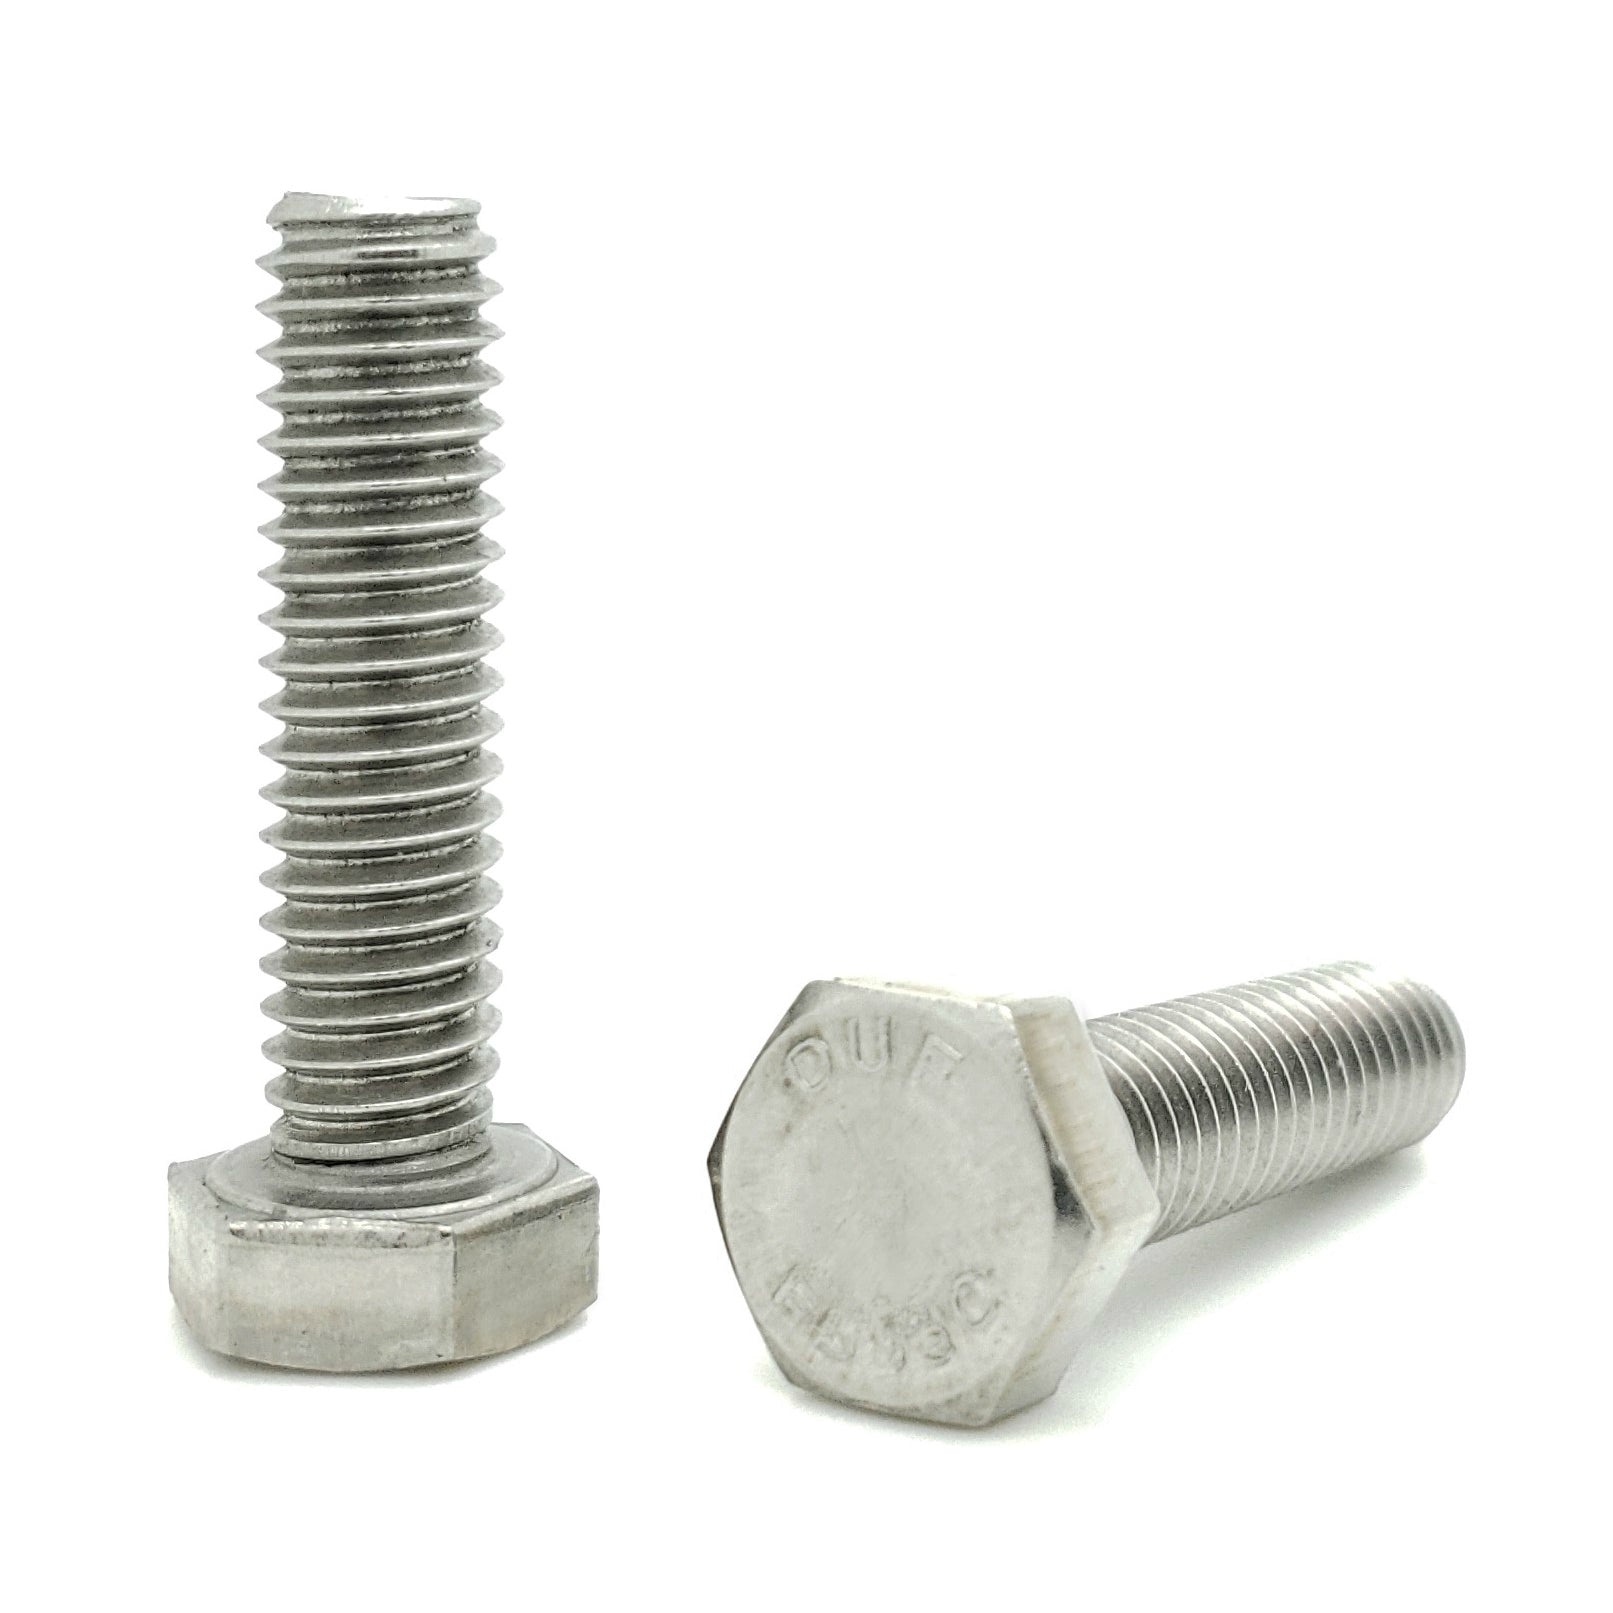 5/16-18 x 1-1/4" 304 Stainless Steel Hex Head Cap Screw Bolts